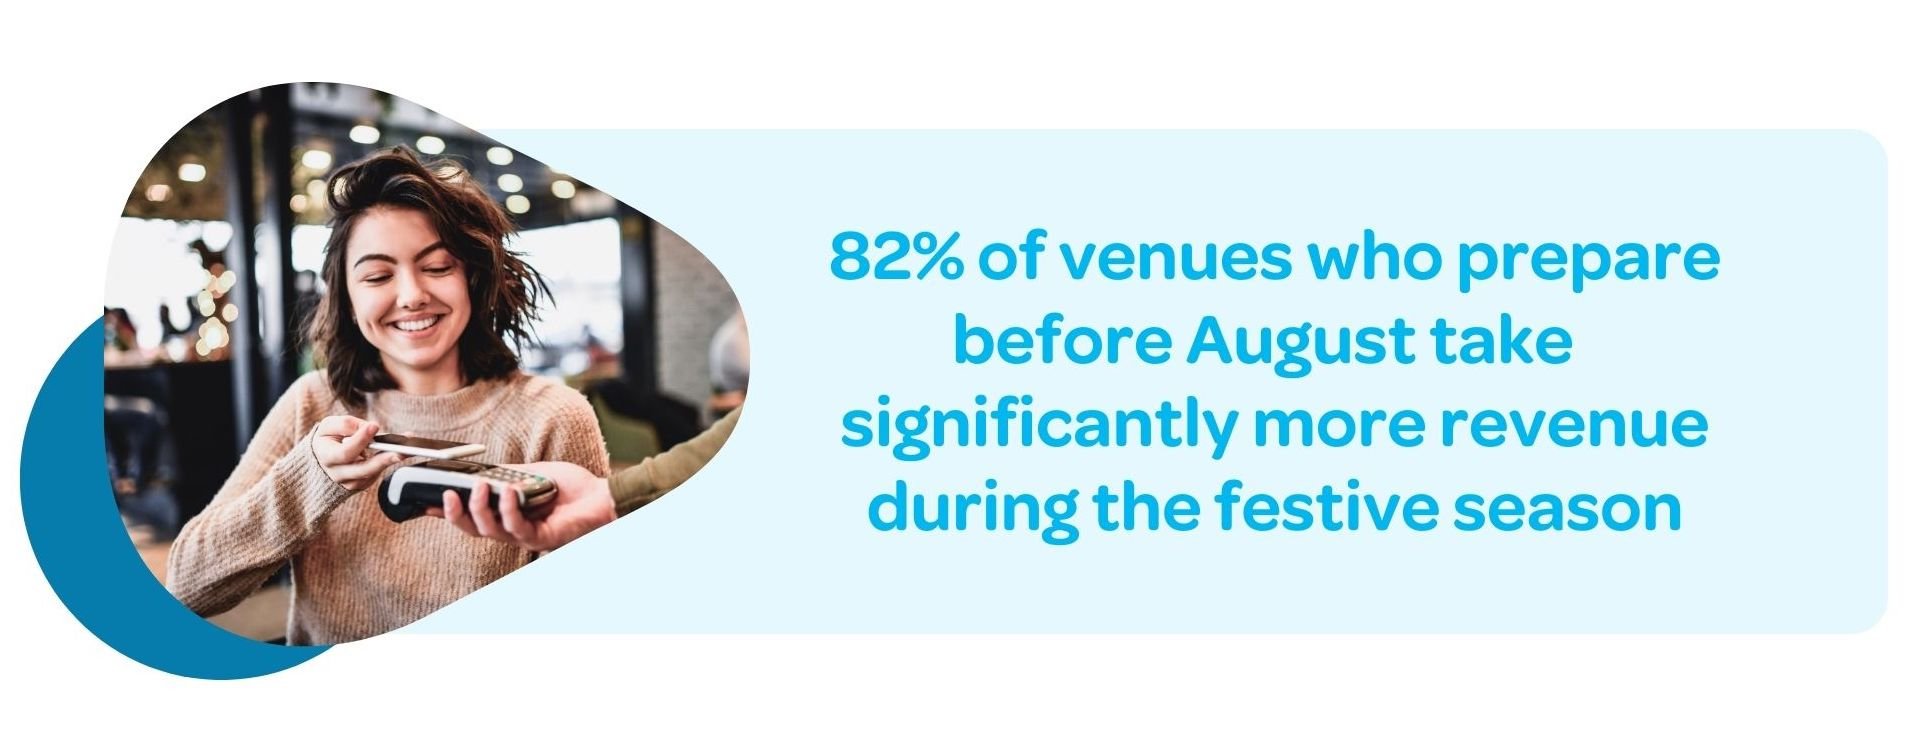 Infographic of a statistic from the ResDiary festive season industry report - 82% of venues who prepares before August take significantly more revenue during the festive season